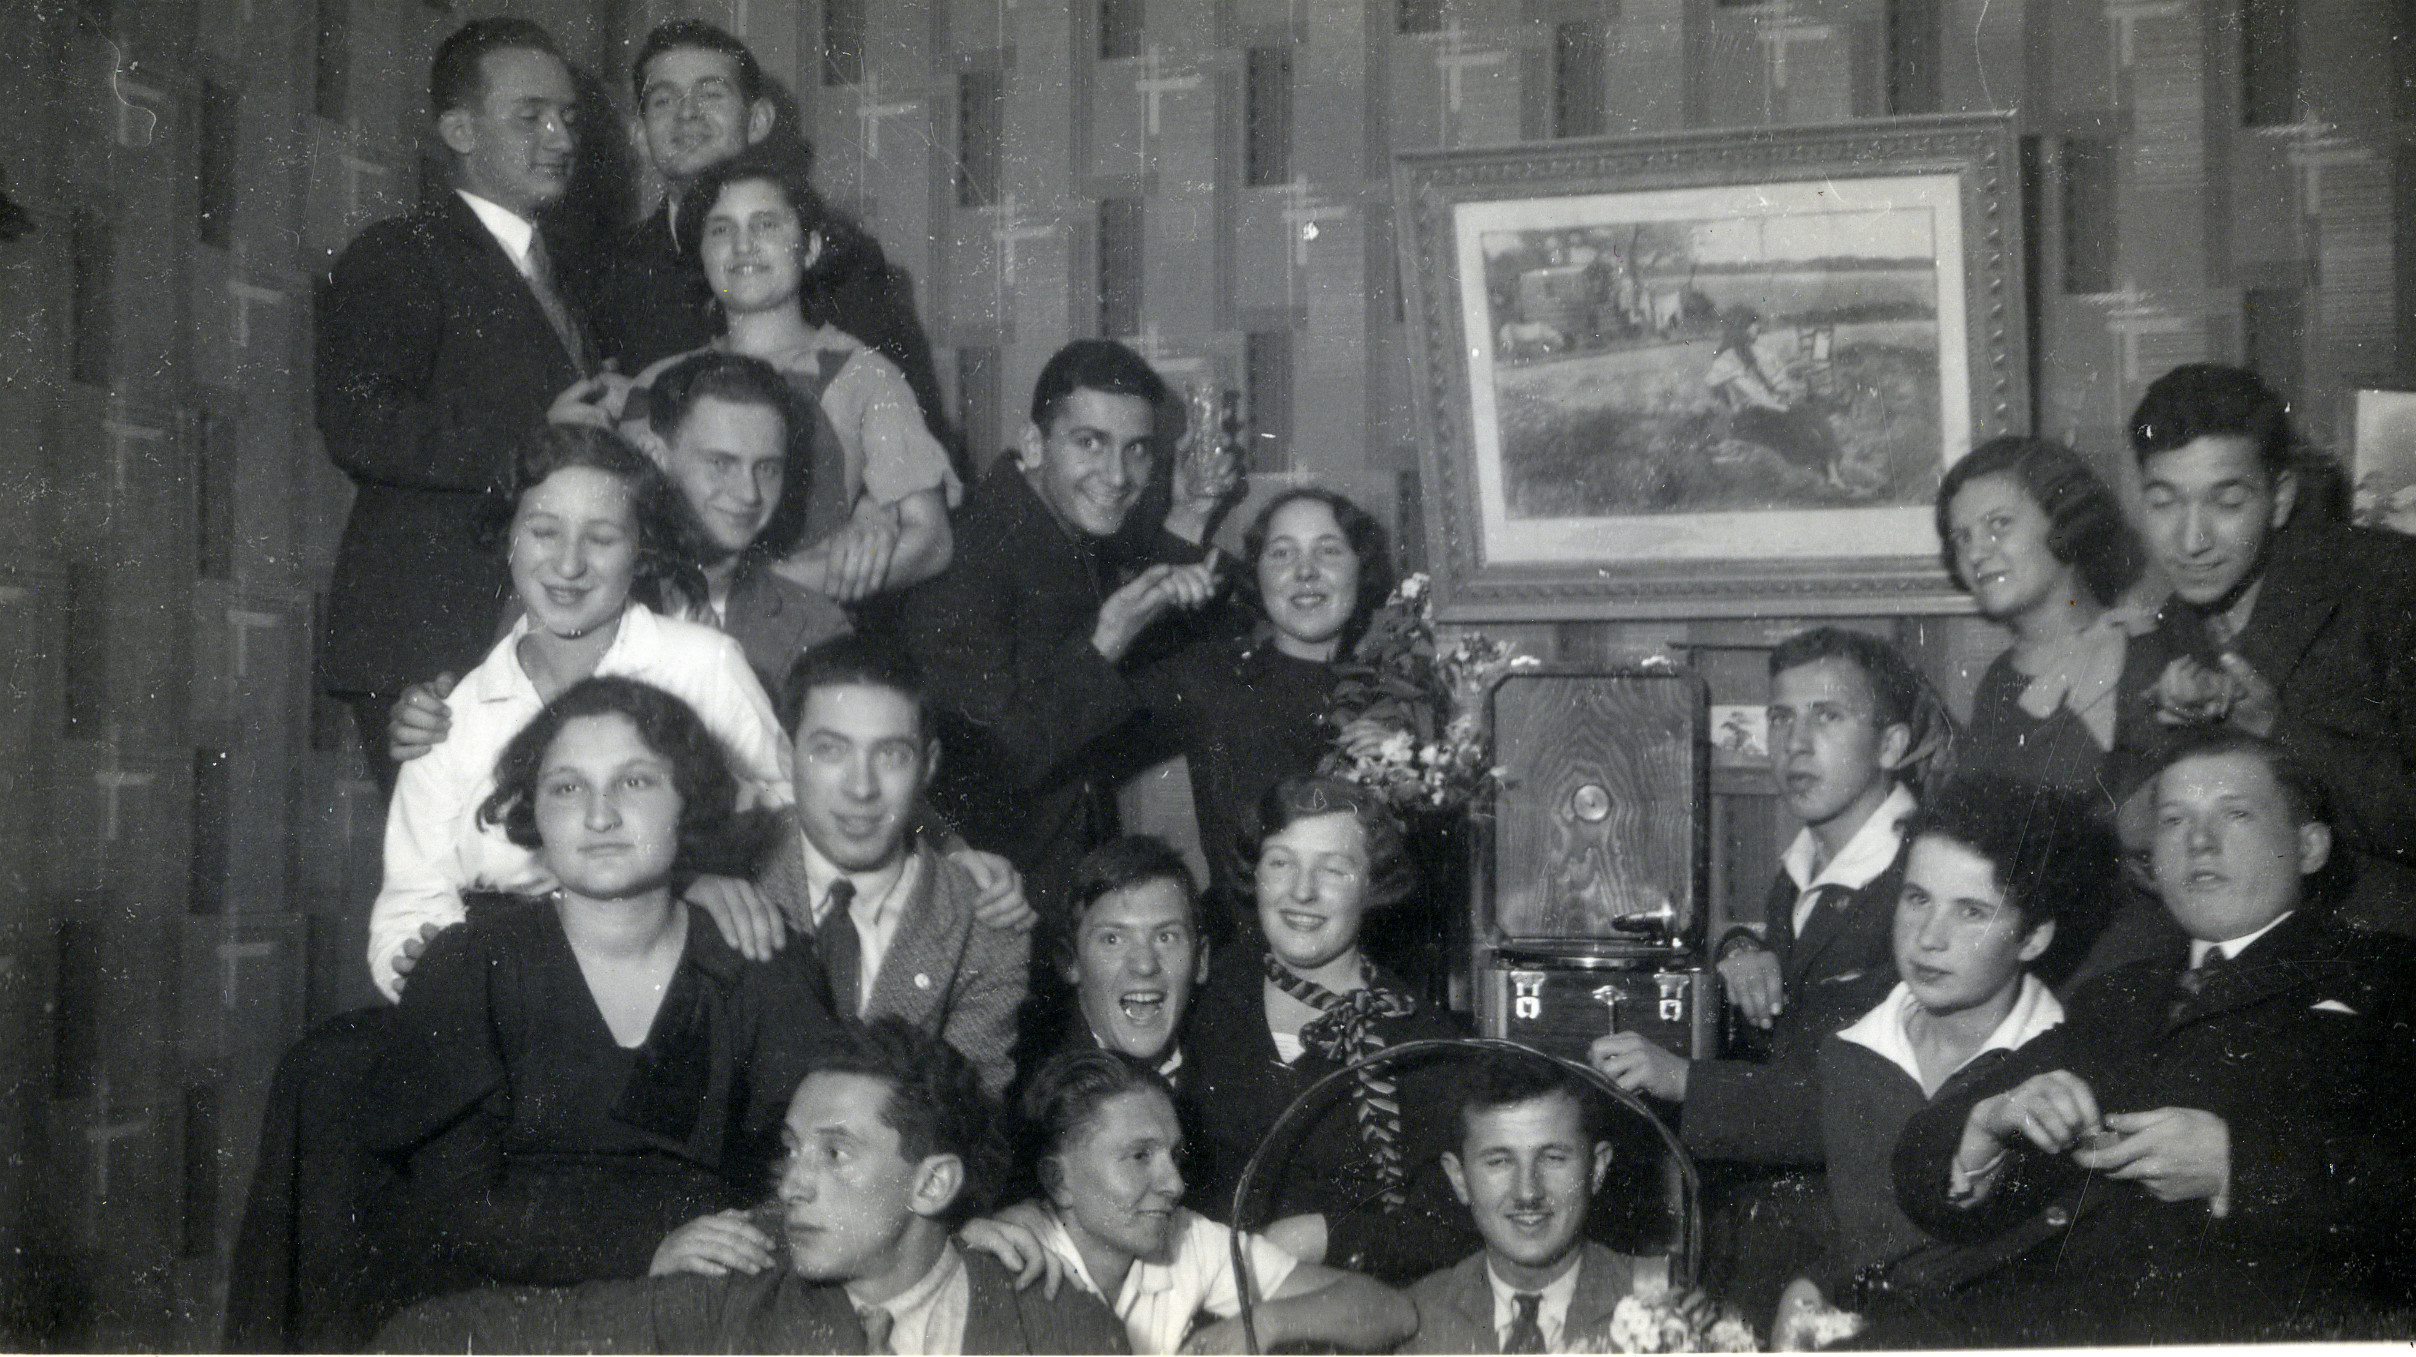 Farewell party for Israel Virshup, who would soon be leaving for Palestine.  

Among those pictured is Israel Virshup (back row, third from the right).